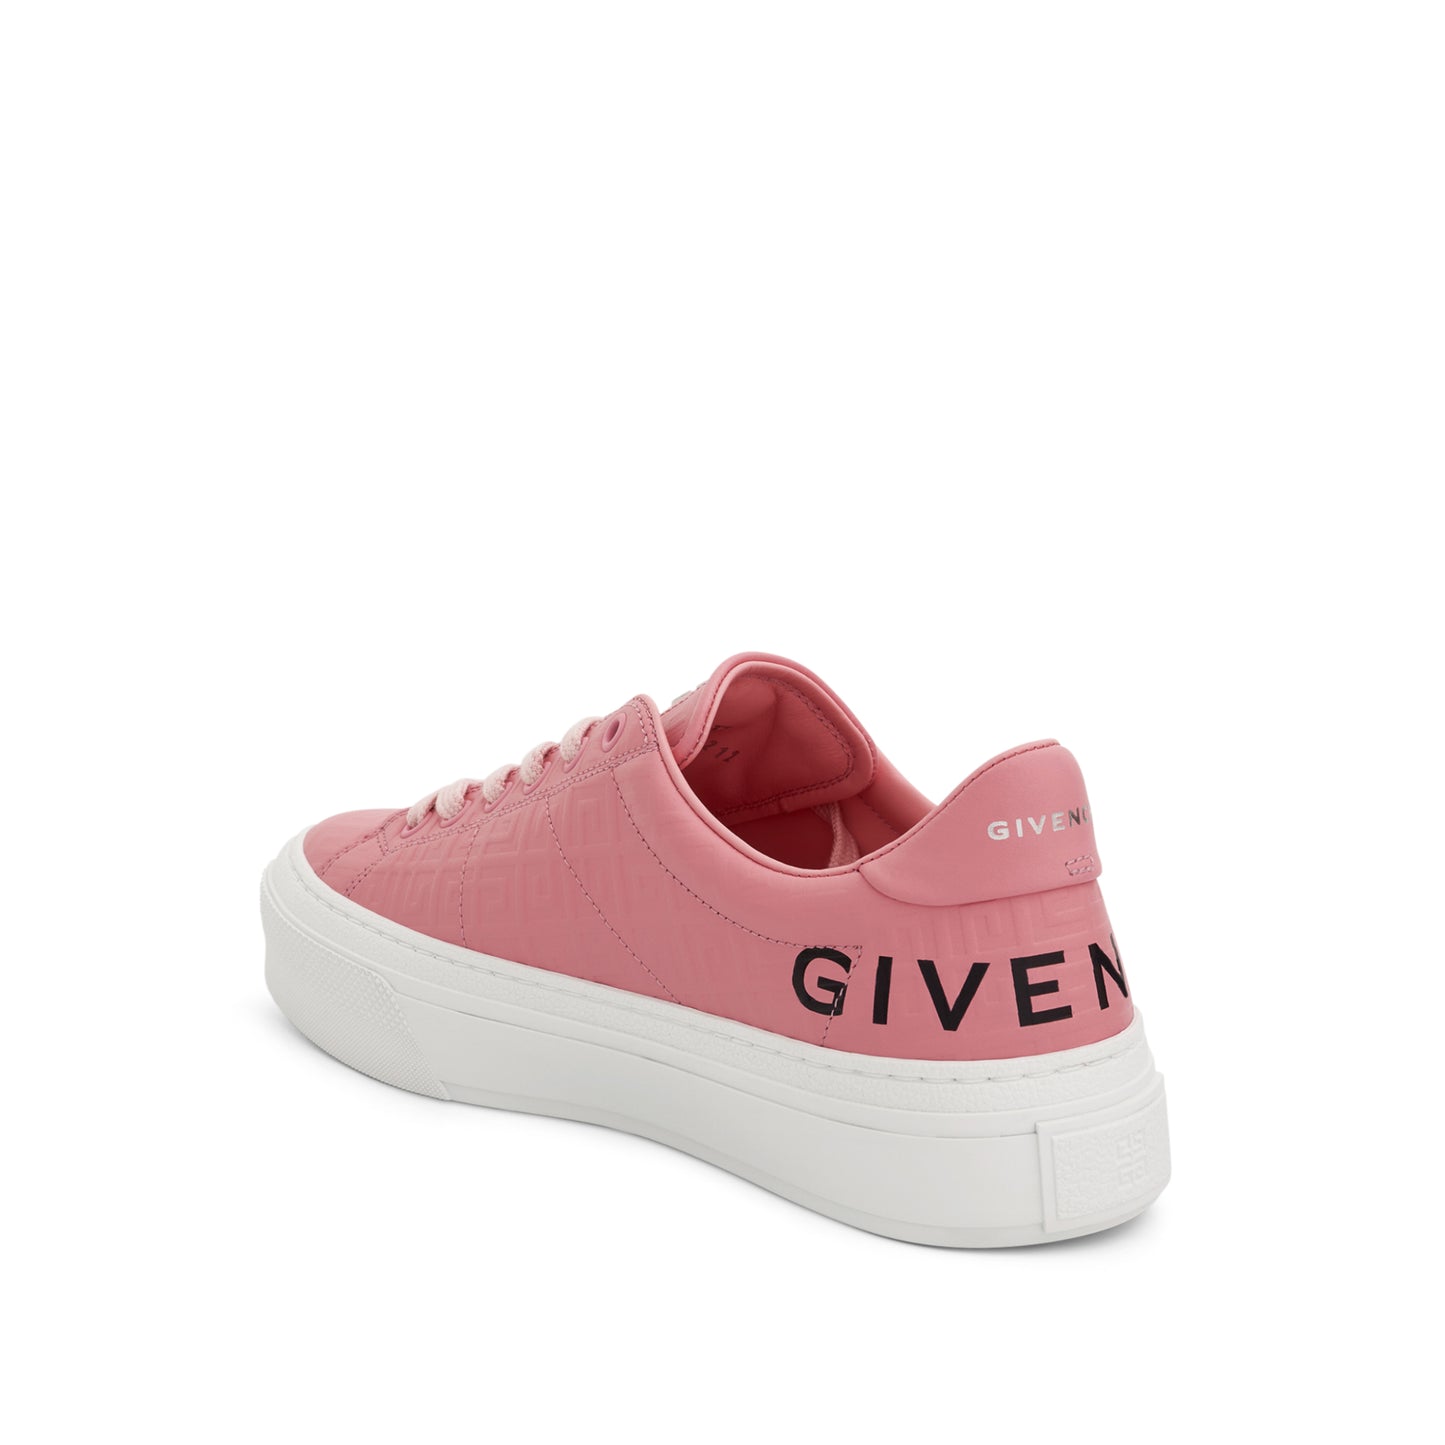 Disney Oswald Tag City Sport Sneaker in Bright Pink